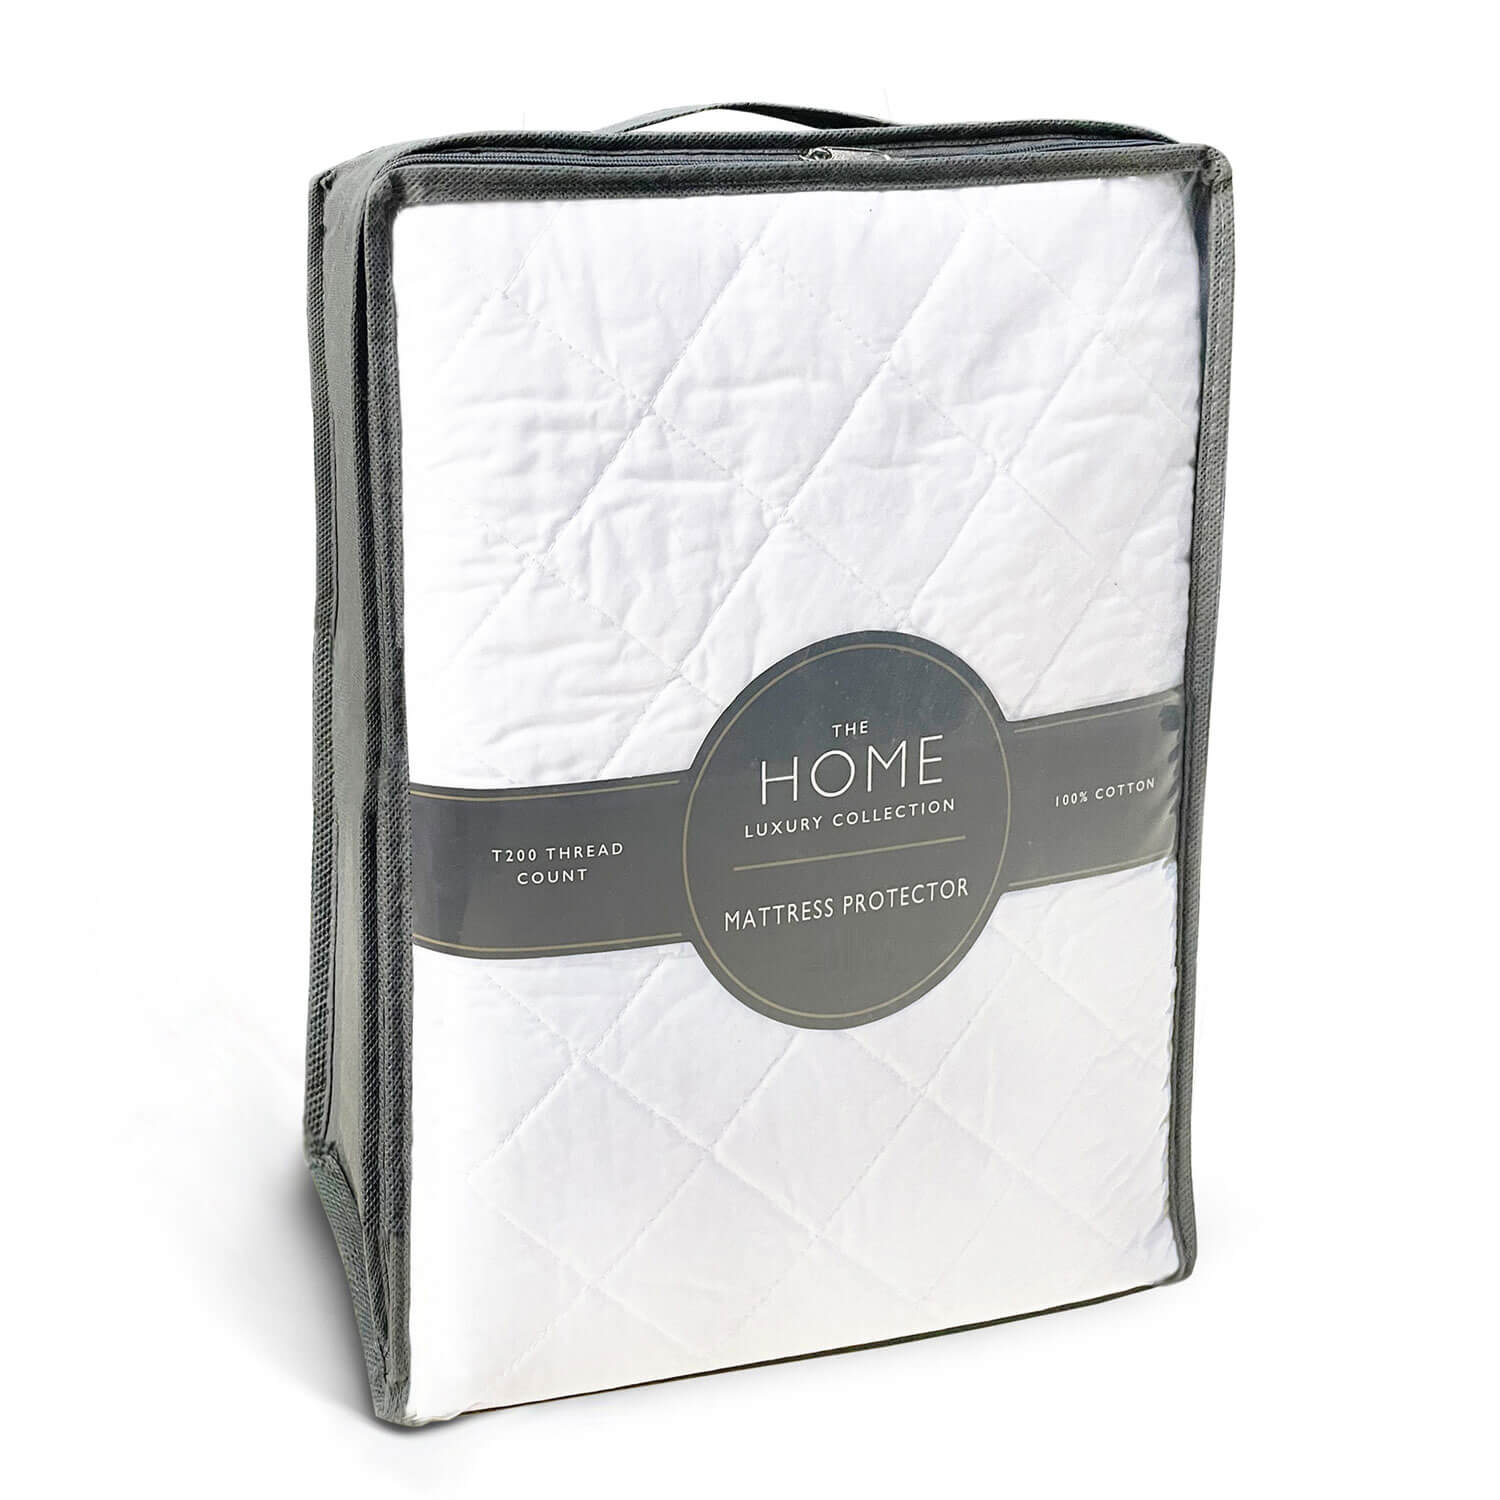 The Home Luxury Collection All Cotton Mattress Protector King Size - White 1 Shaws Department Stores